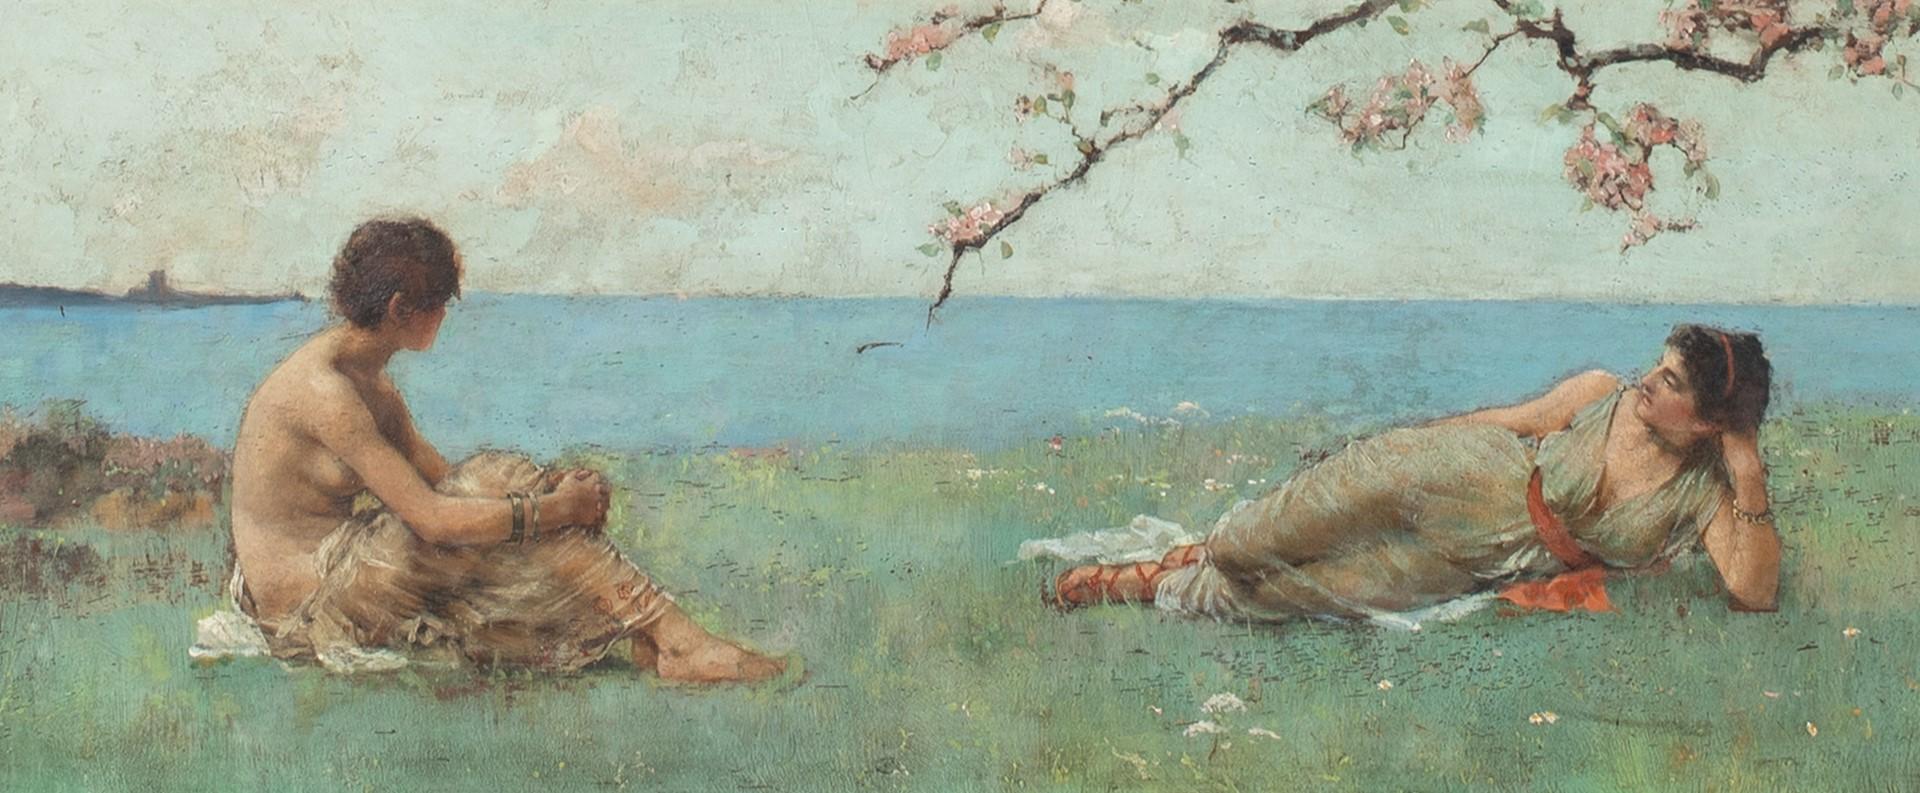 Triptych Of Maidens In Spring, circa 1900 - Painting by Henry John Yeend King